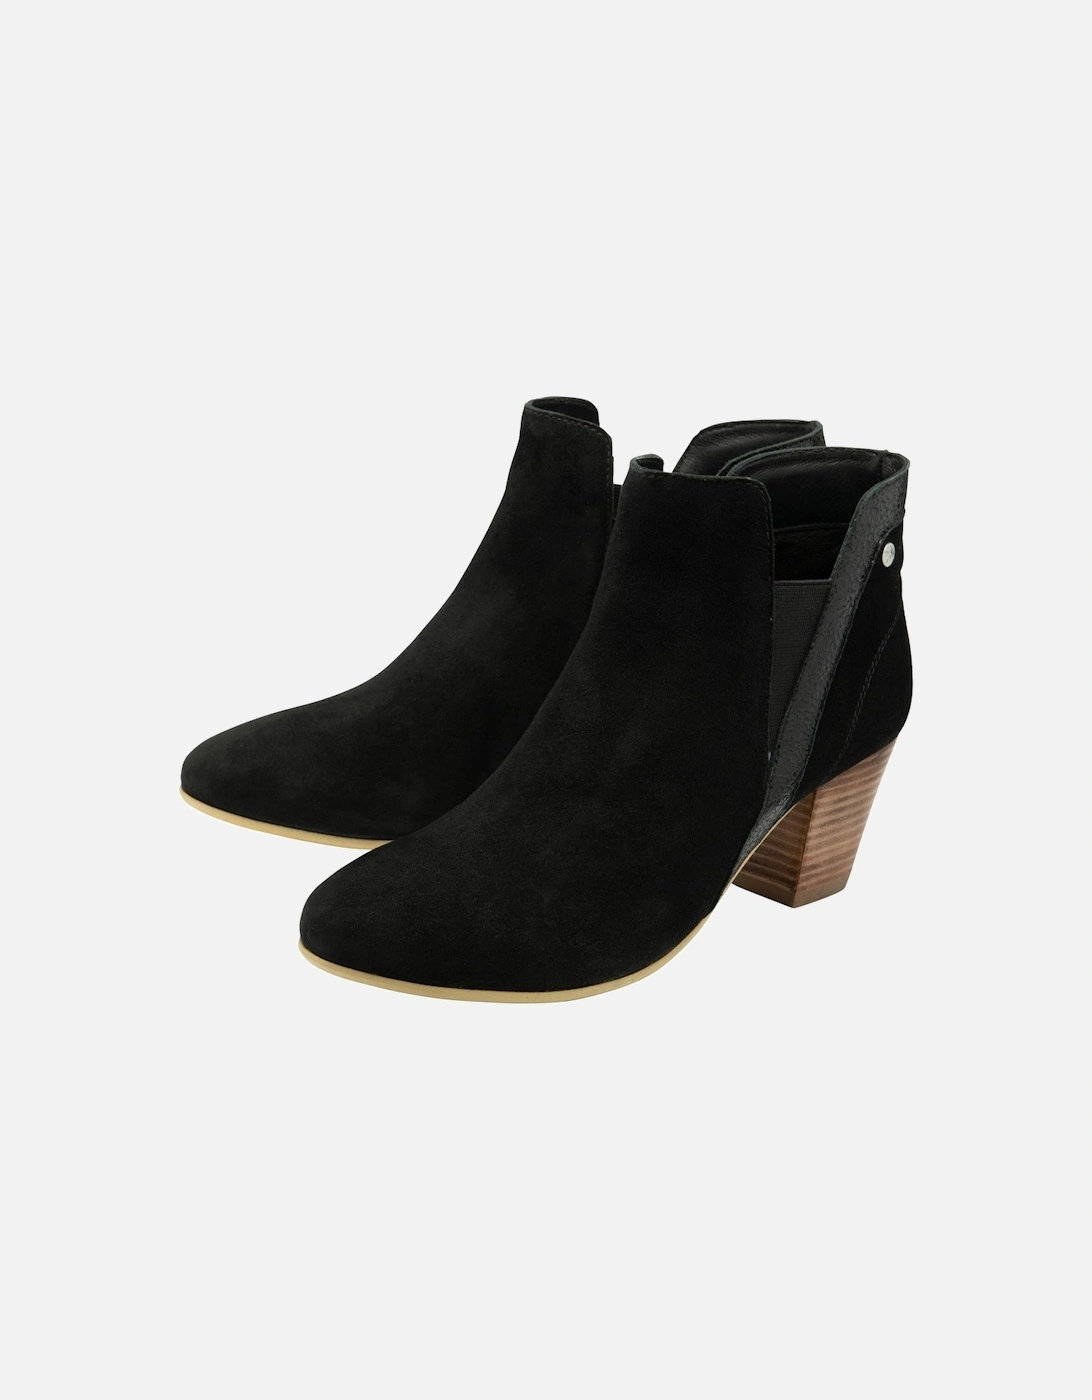 Narin Womens Ankle Boots